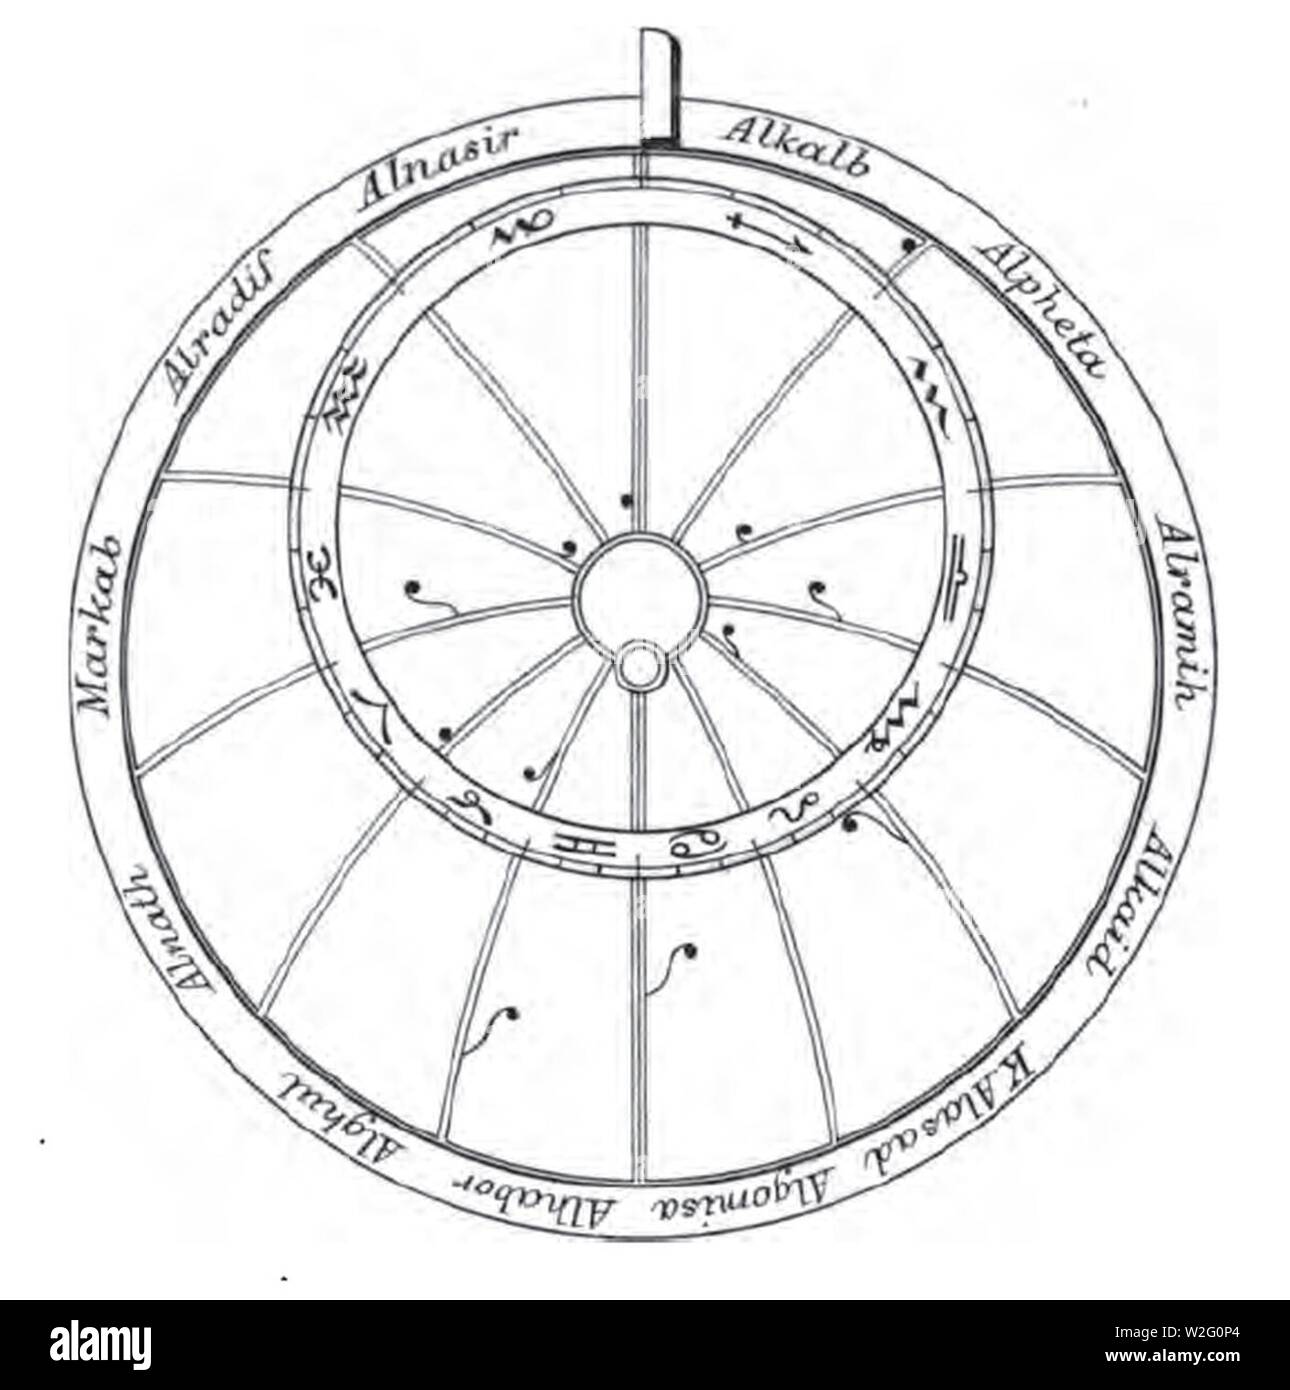 Chaucer astrolabe 4. Stock Photo